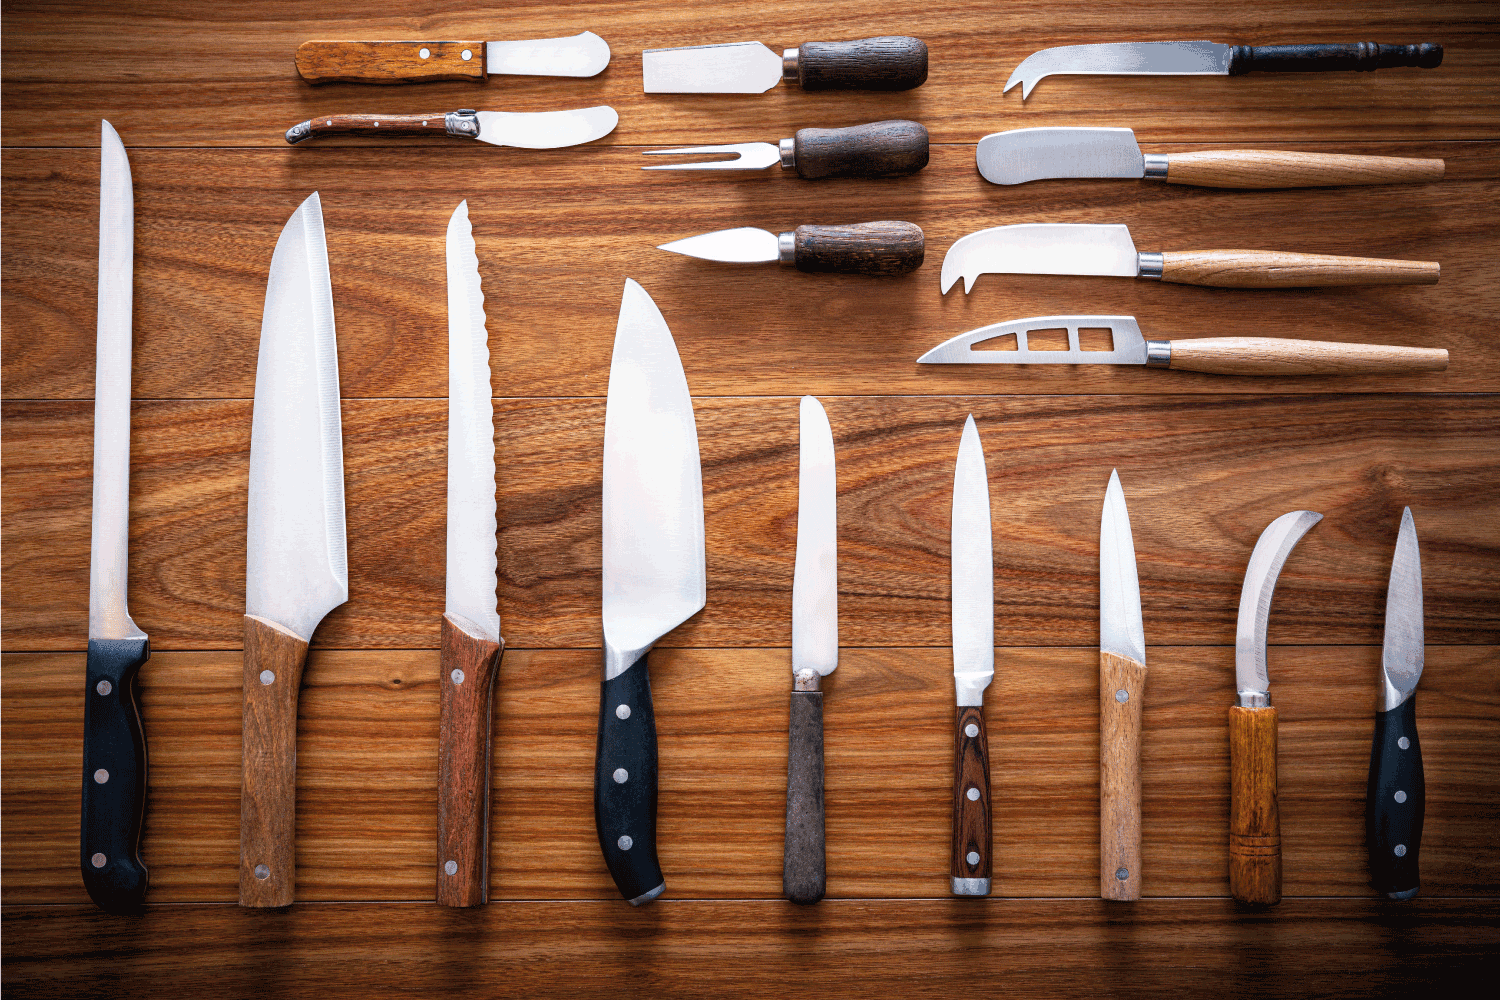 Kitchen knives inventory on wooden background in a row arrangement